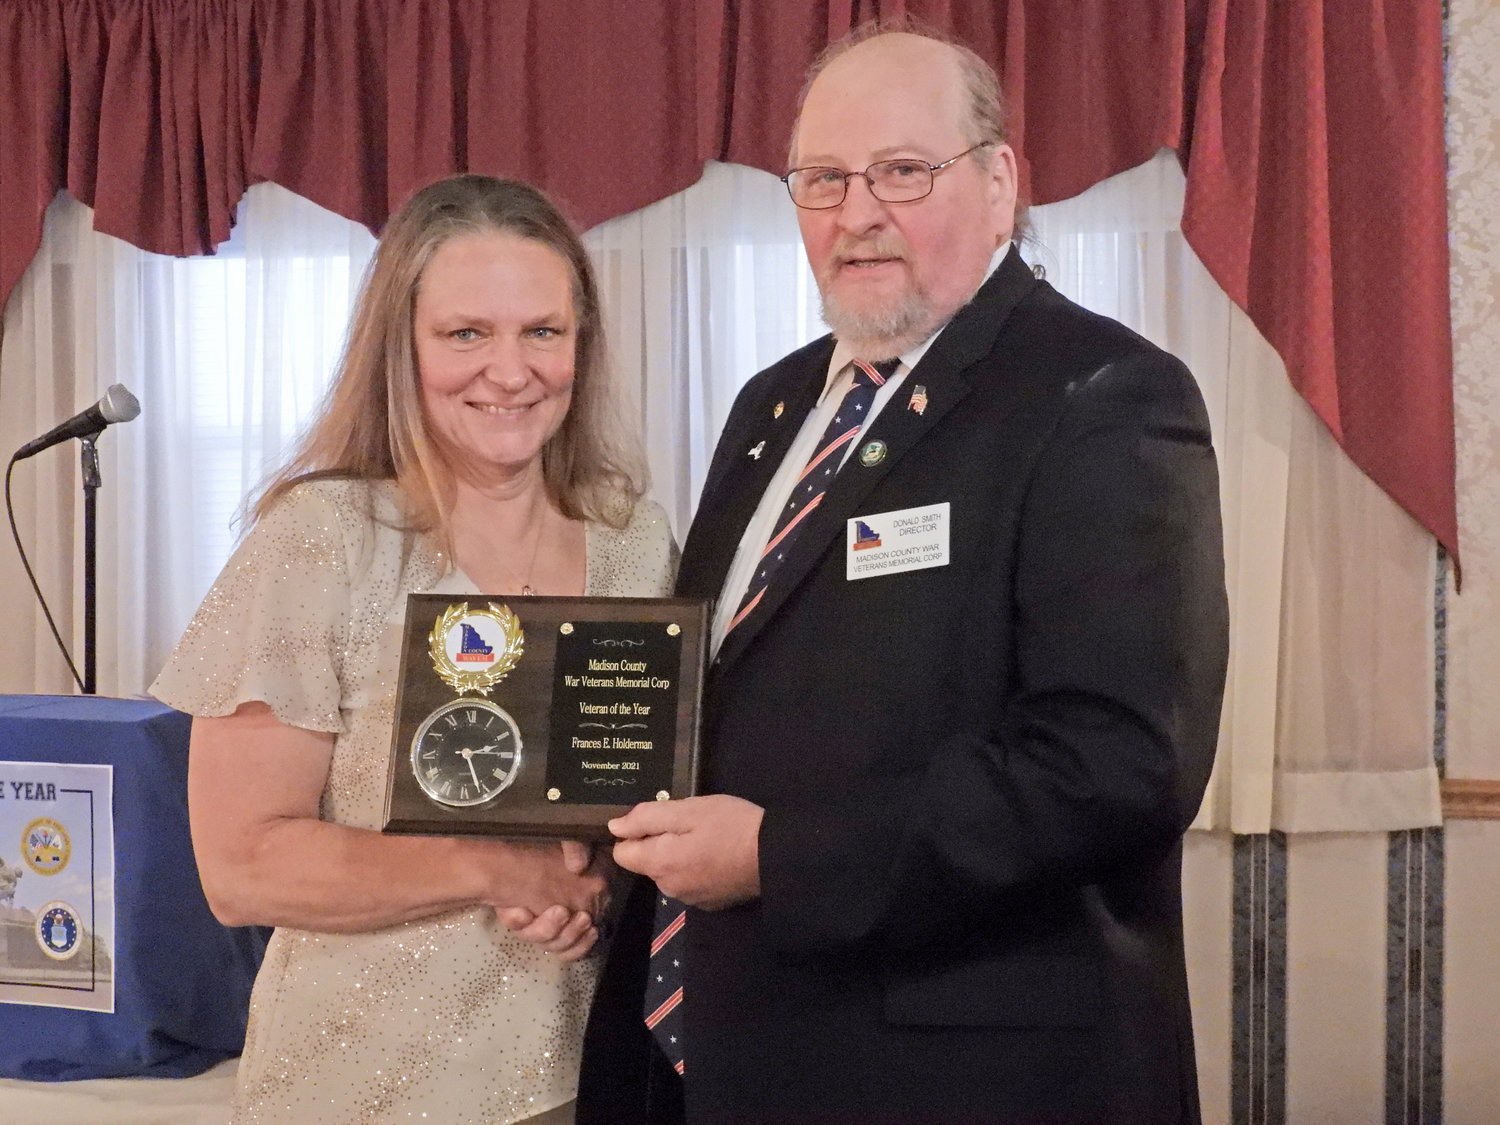 VETERAN OF THE YEAR — WAVEM President Don Smith presents Frances Holderman with the Madison County Veteran of the Year Award, recognizing her for her exemplary military career and service to the community.